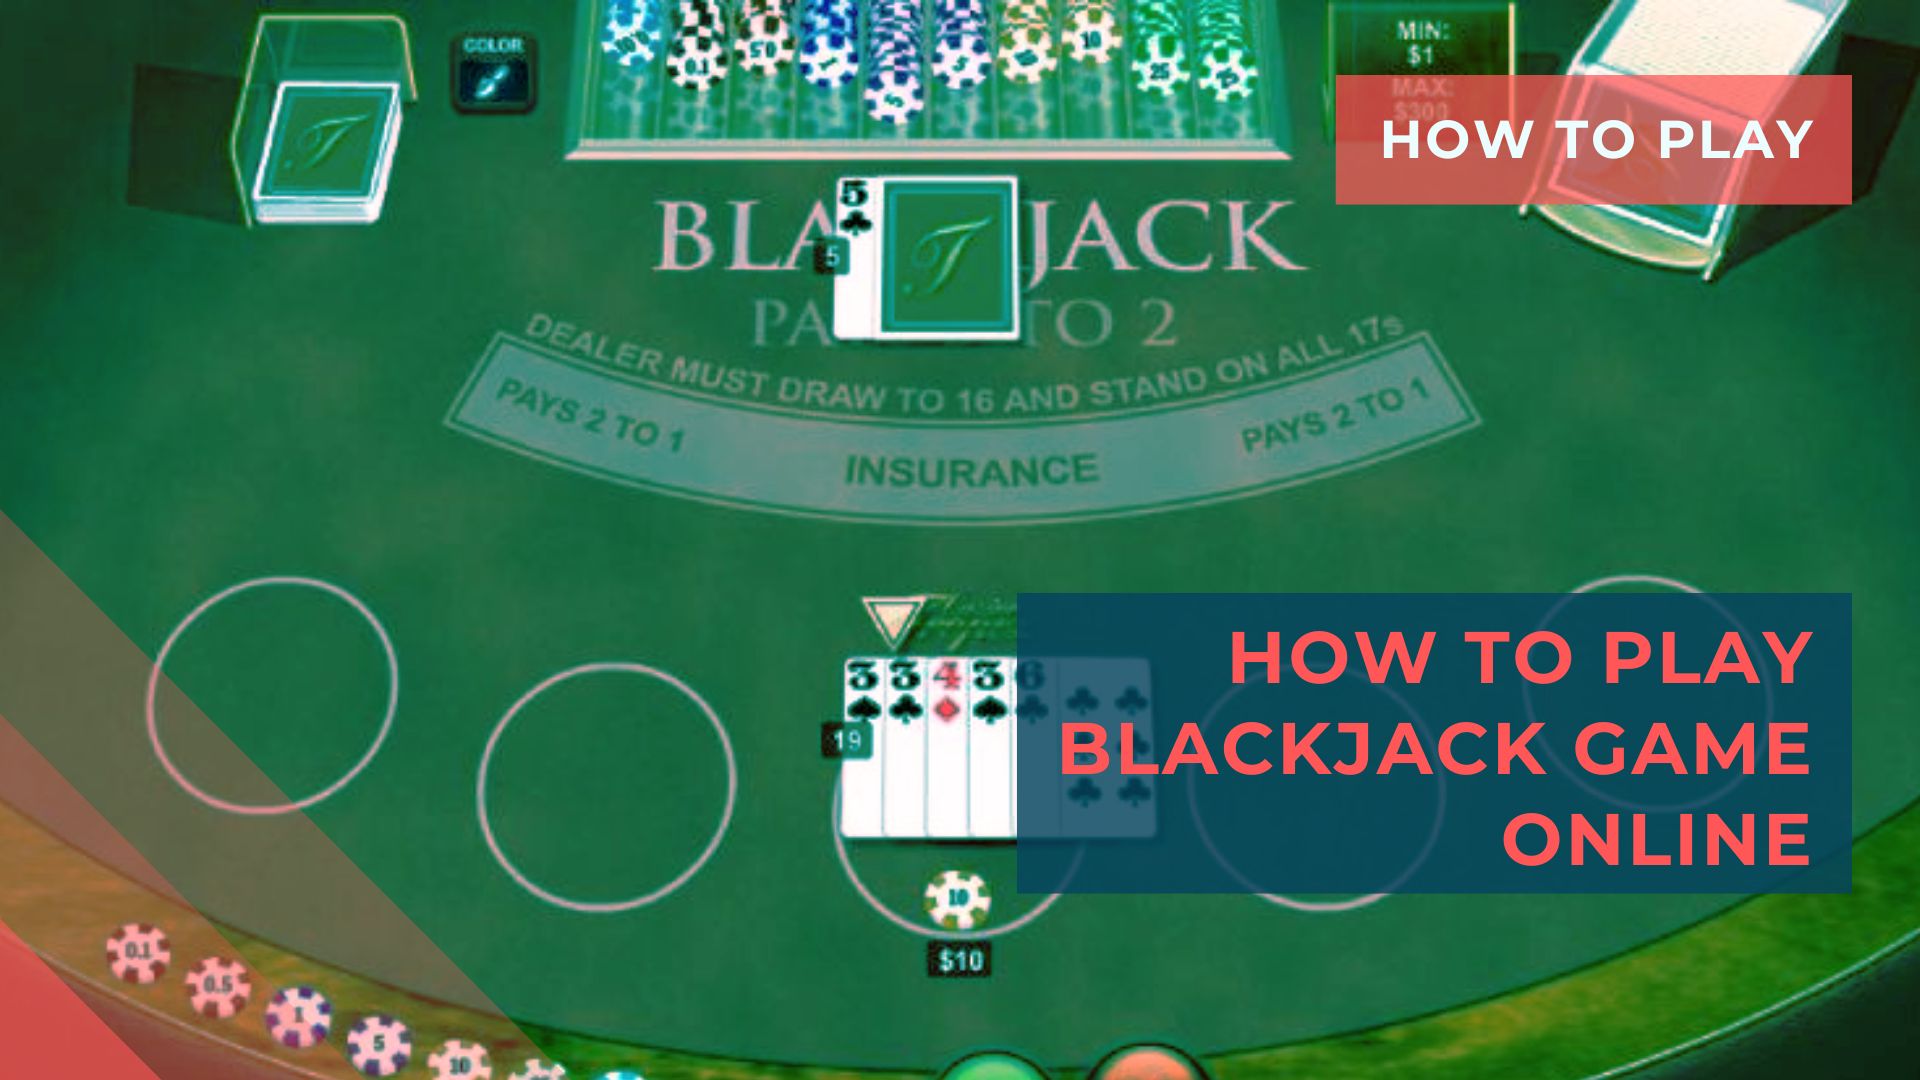 How to Play Blackjack Game Online - Full Manual 2022